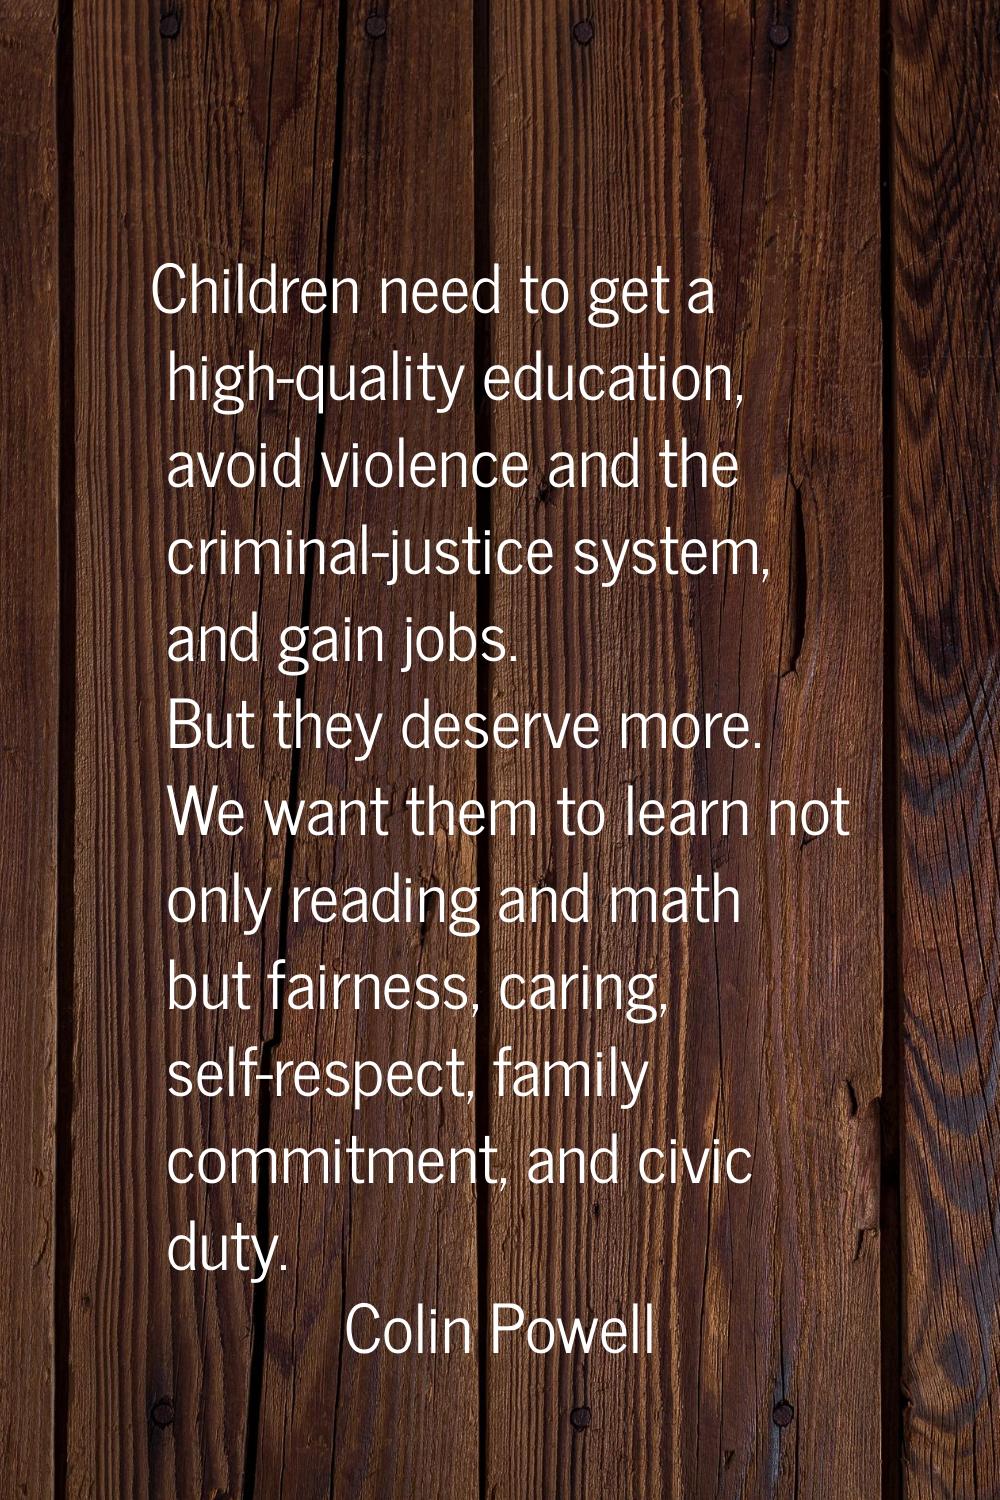 Children need to get a high-quality education, avoid violence and the criminal-justice system, and 